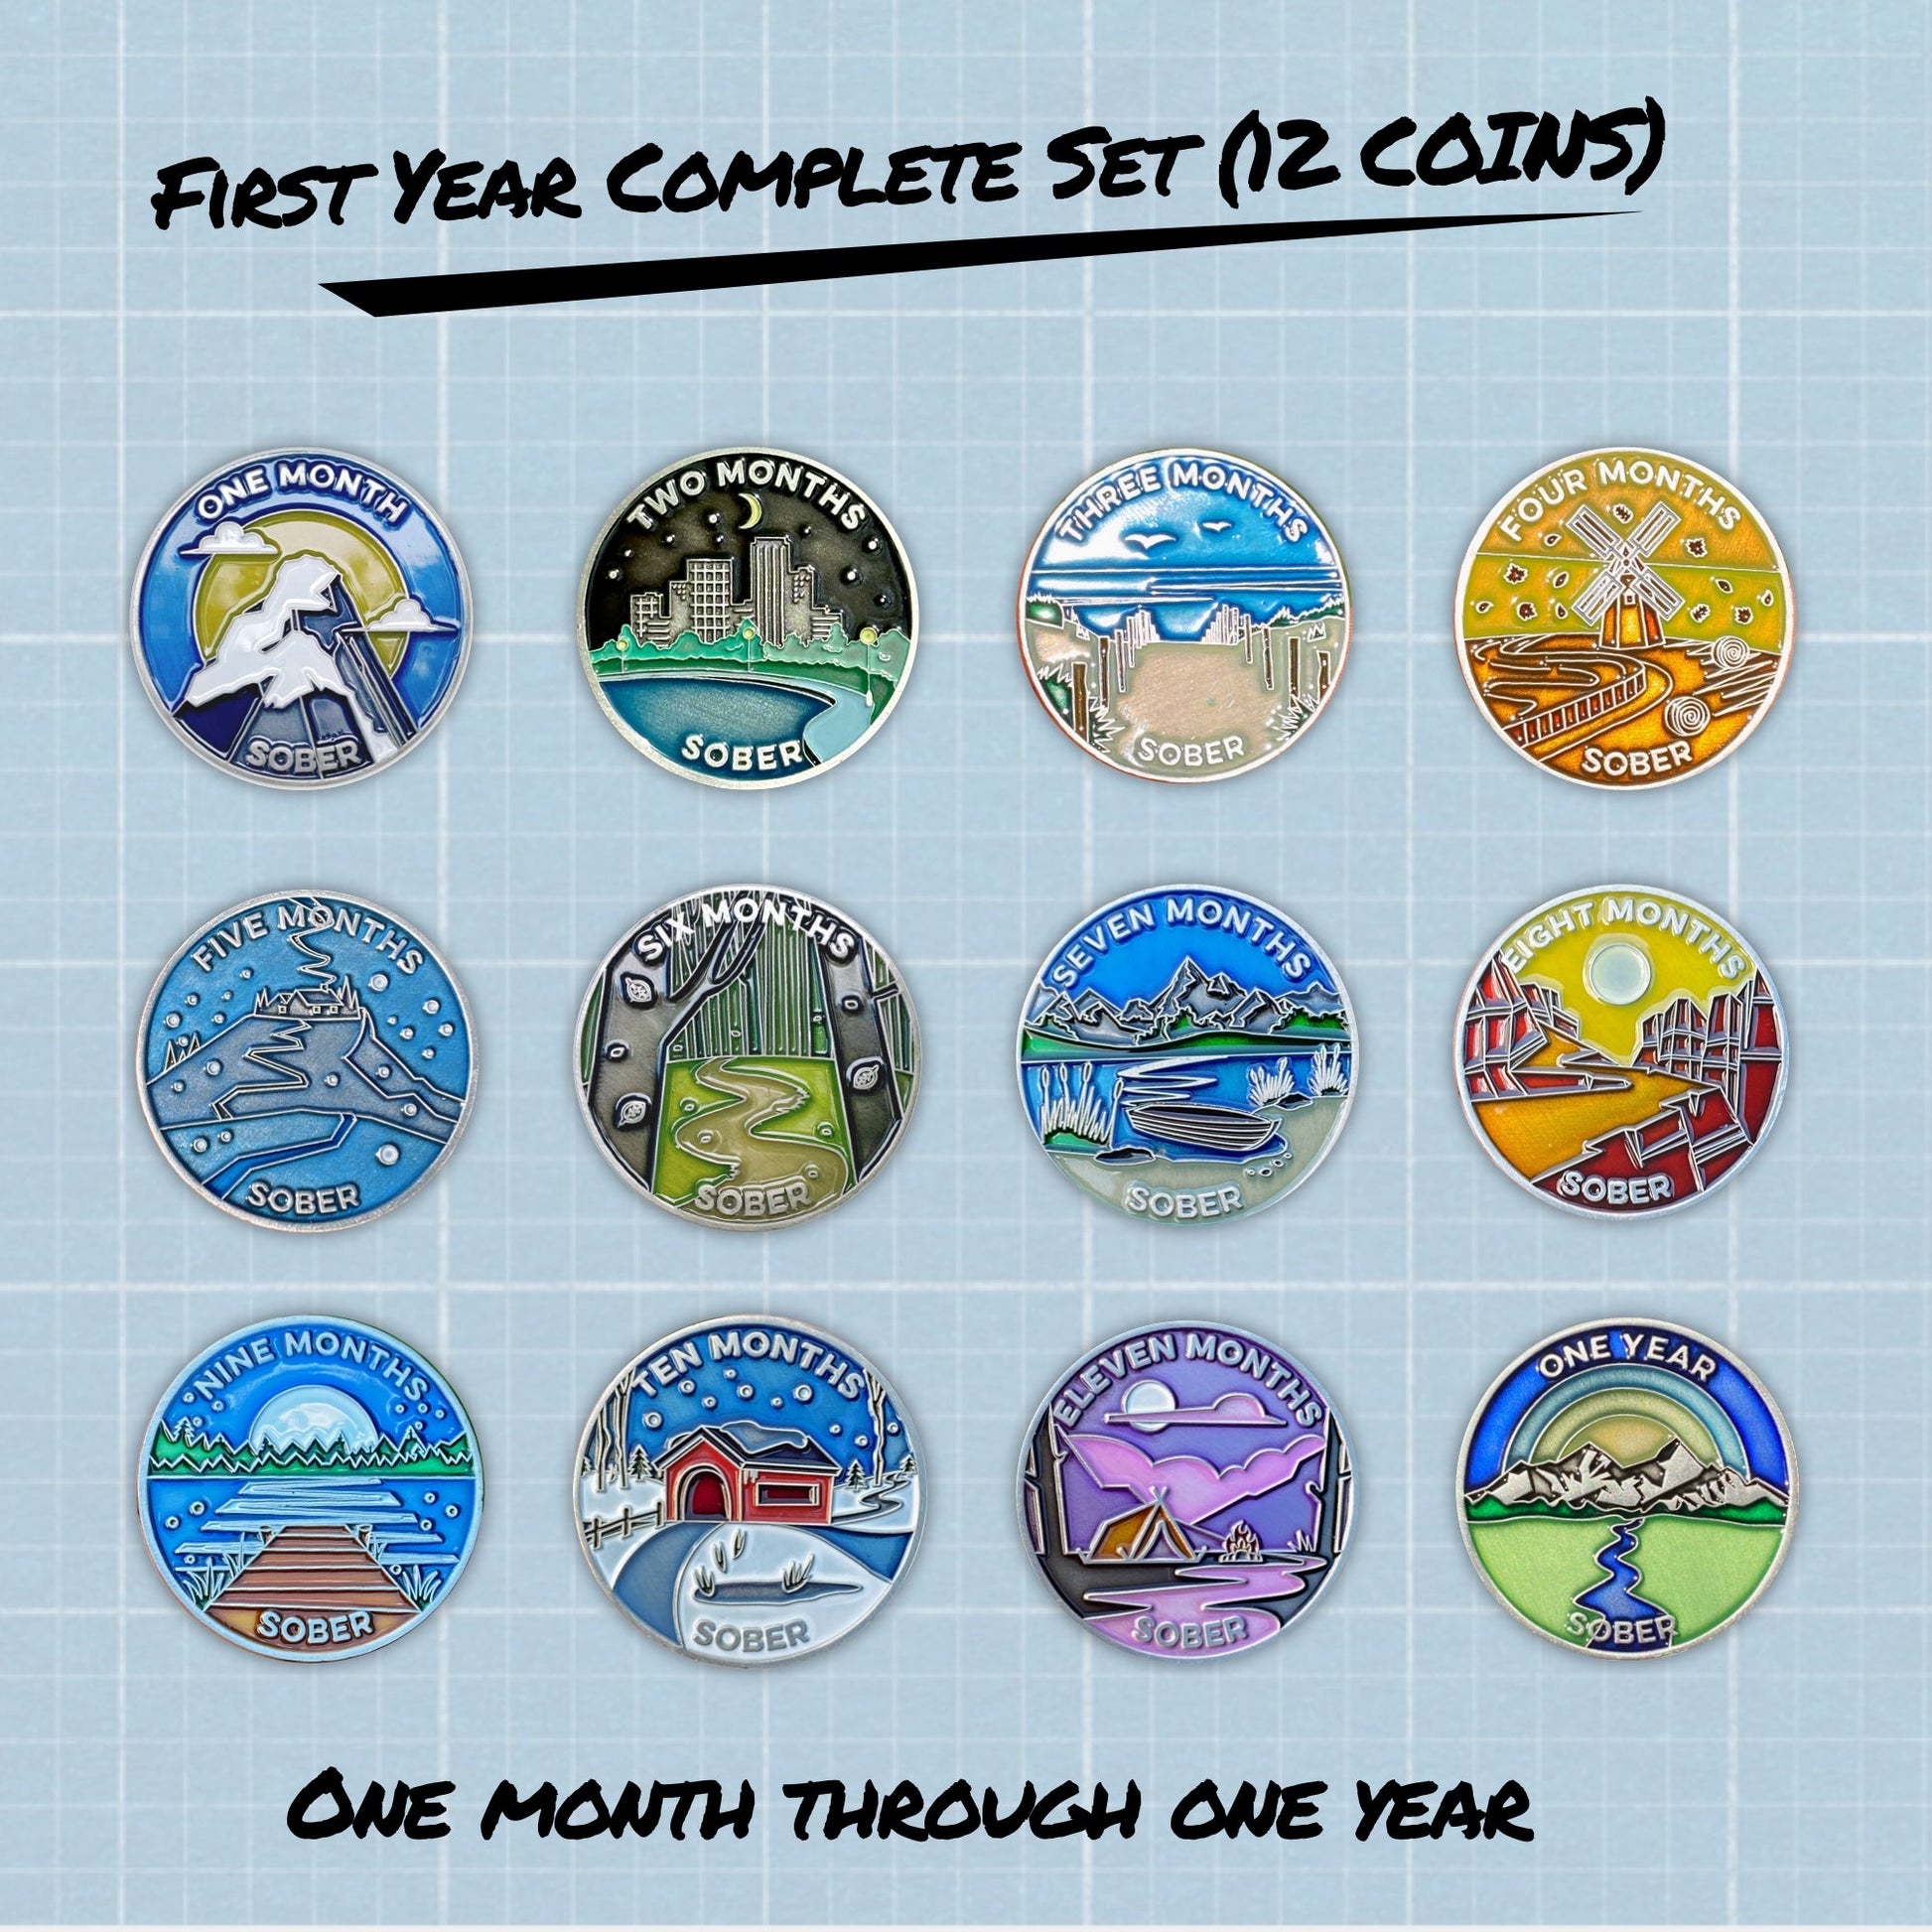 First Year Sober Complete Set: 12 coins total - The Achieve Mint